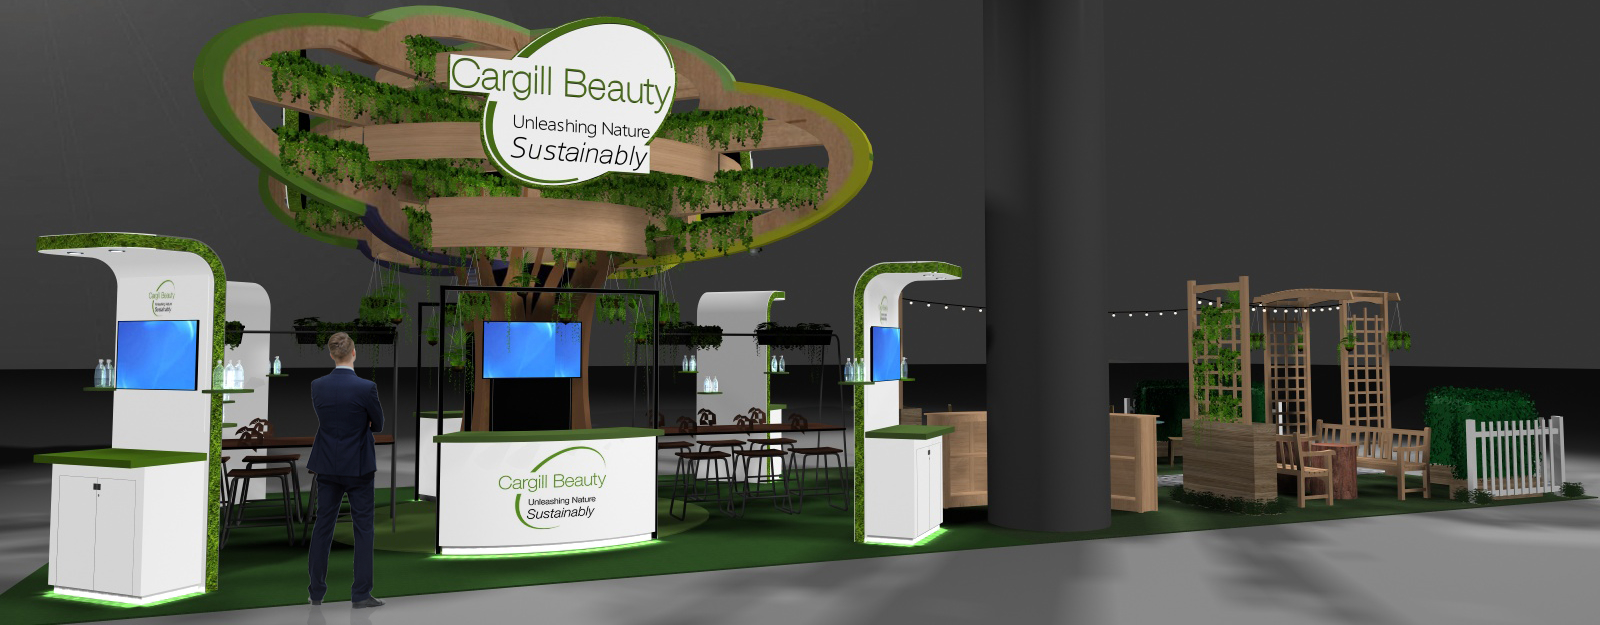 Cargill Beauty - Suppliers' Day Stand 919